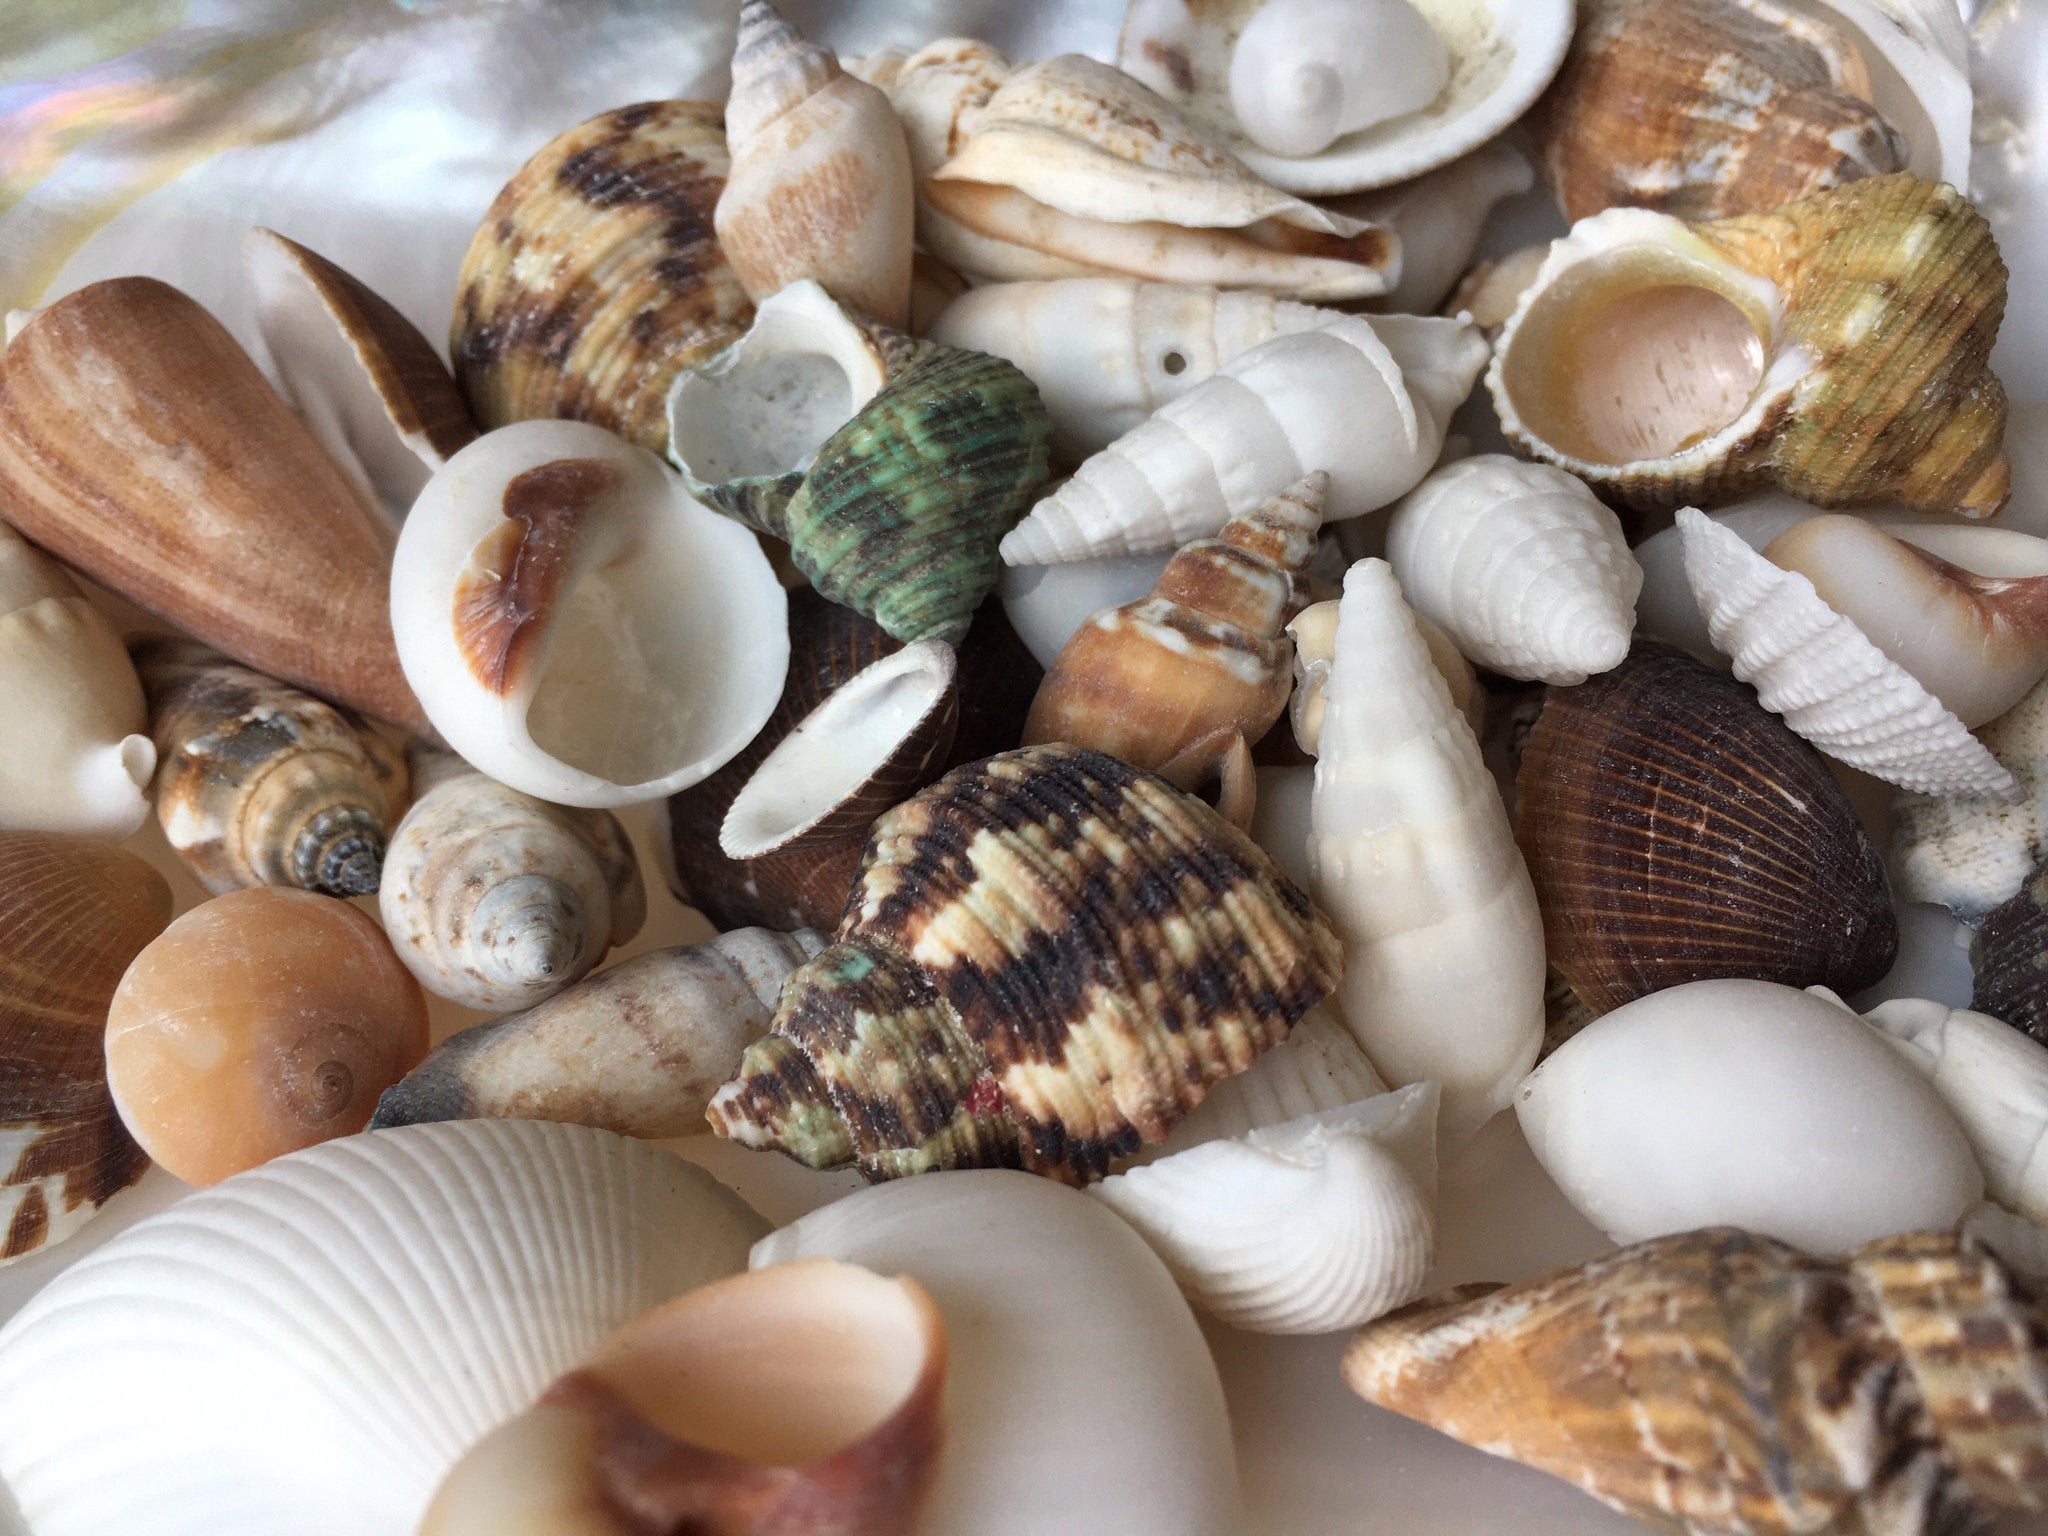 Philippines Mix-Beach Wedding Decor-Sea Shells Bulk-Assorted Seashell  Mix-Sea Shells-Sea Shells for Crafting-FREE SHIPPING!